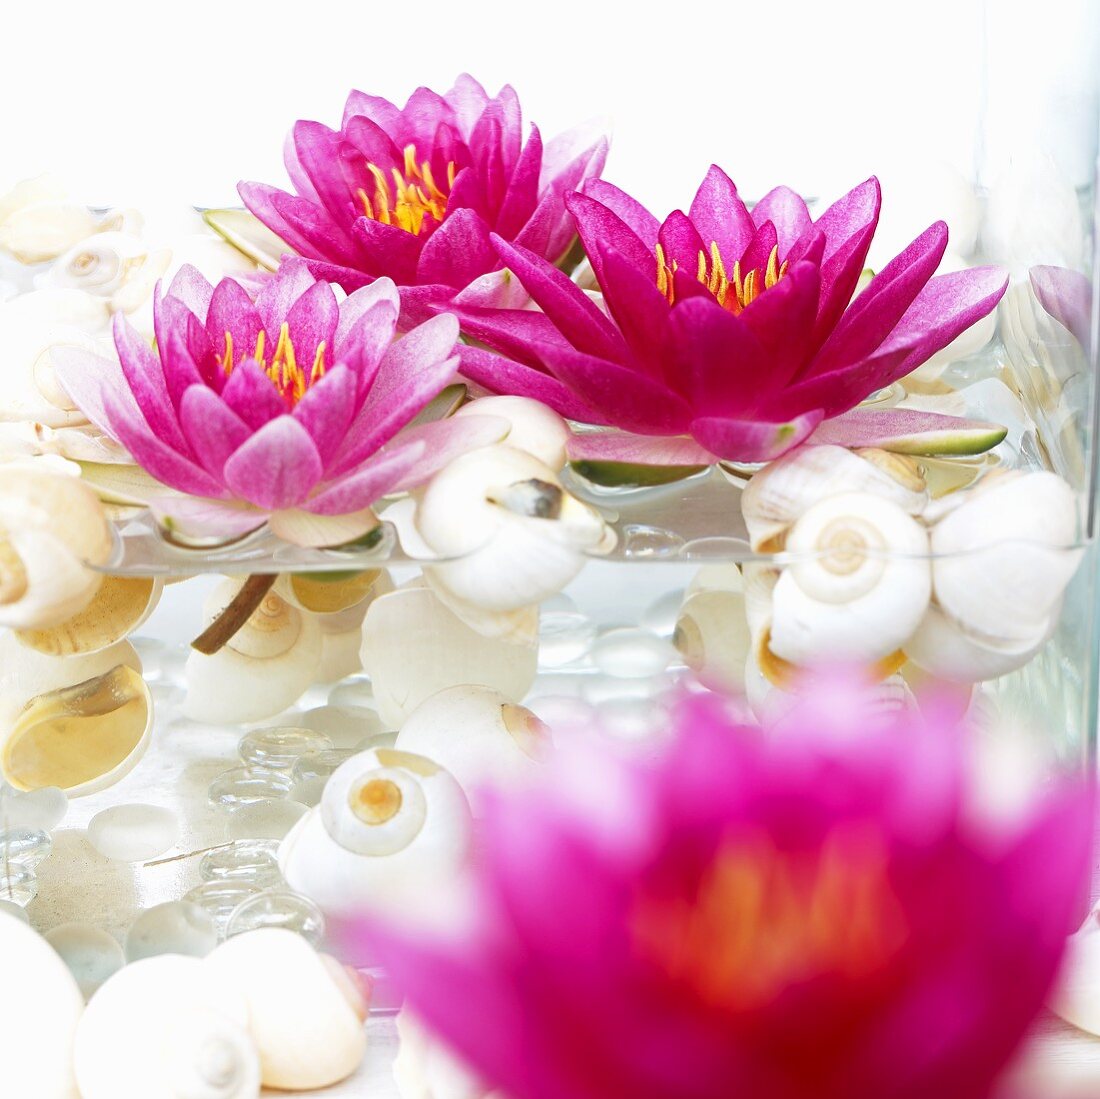 Water lilies and snail shells